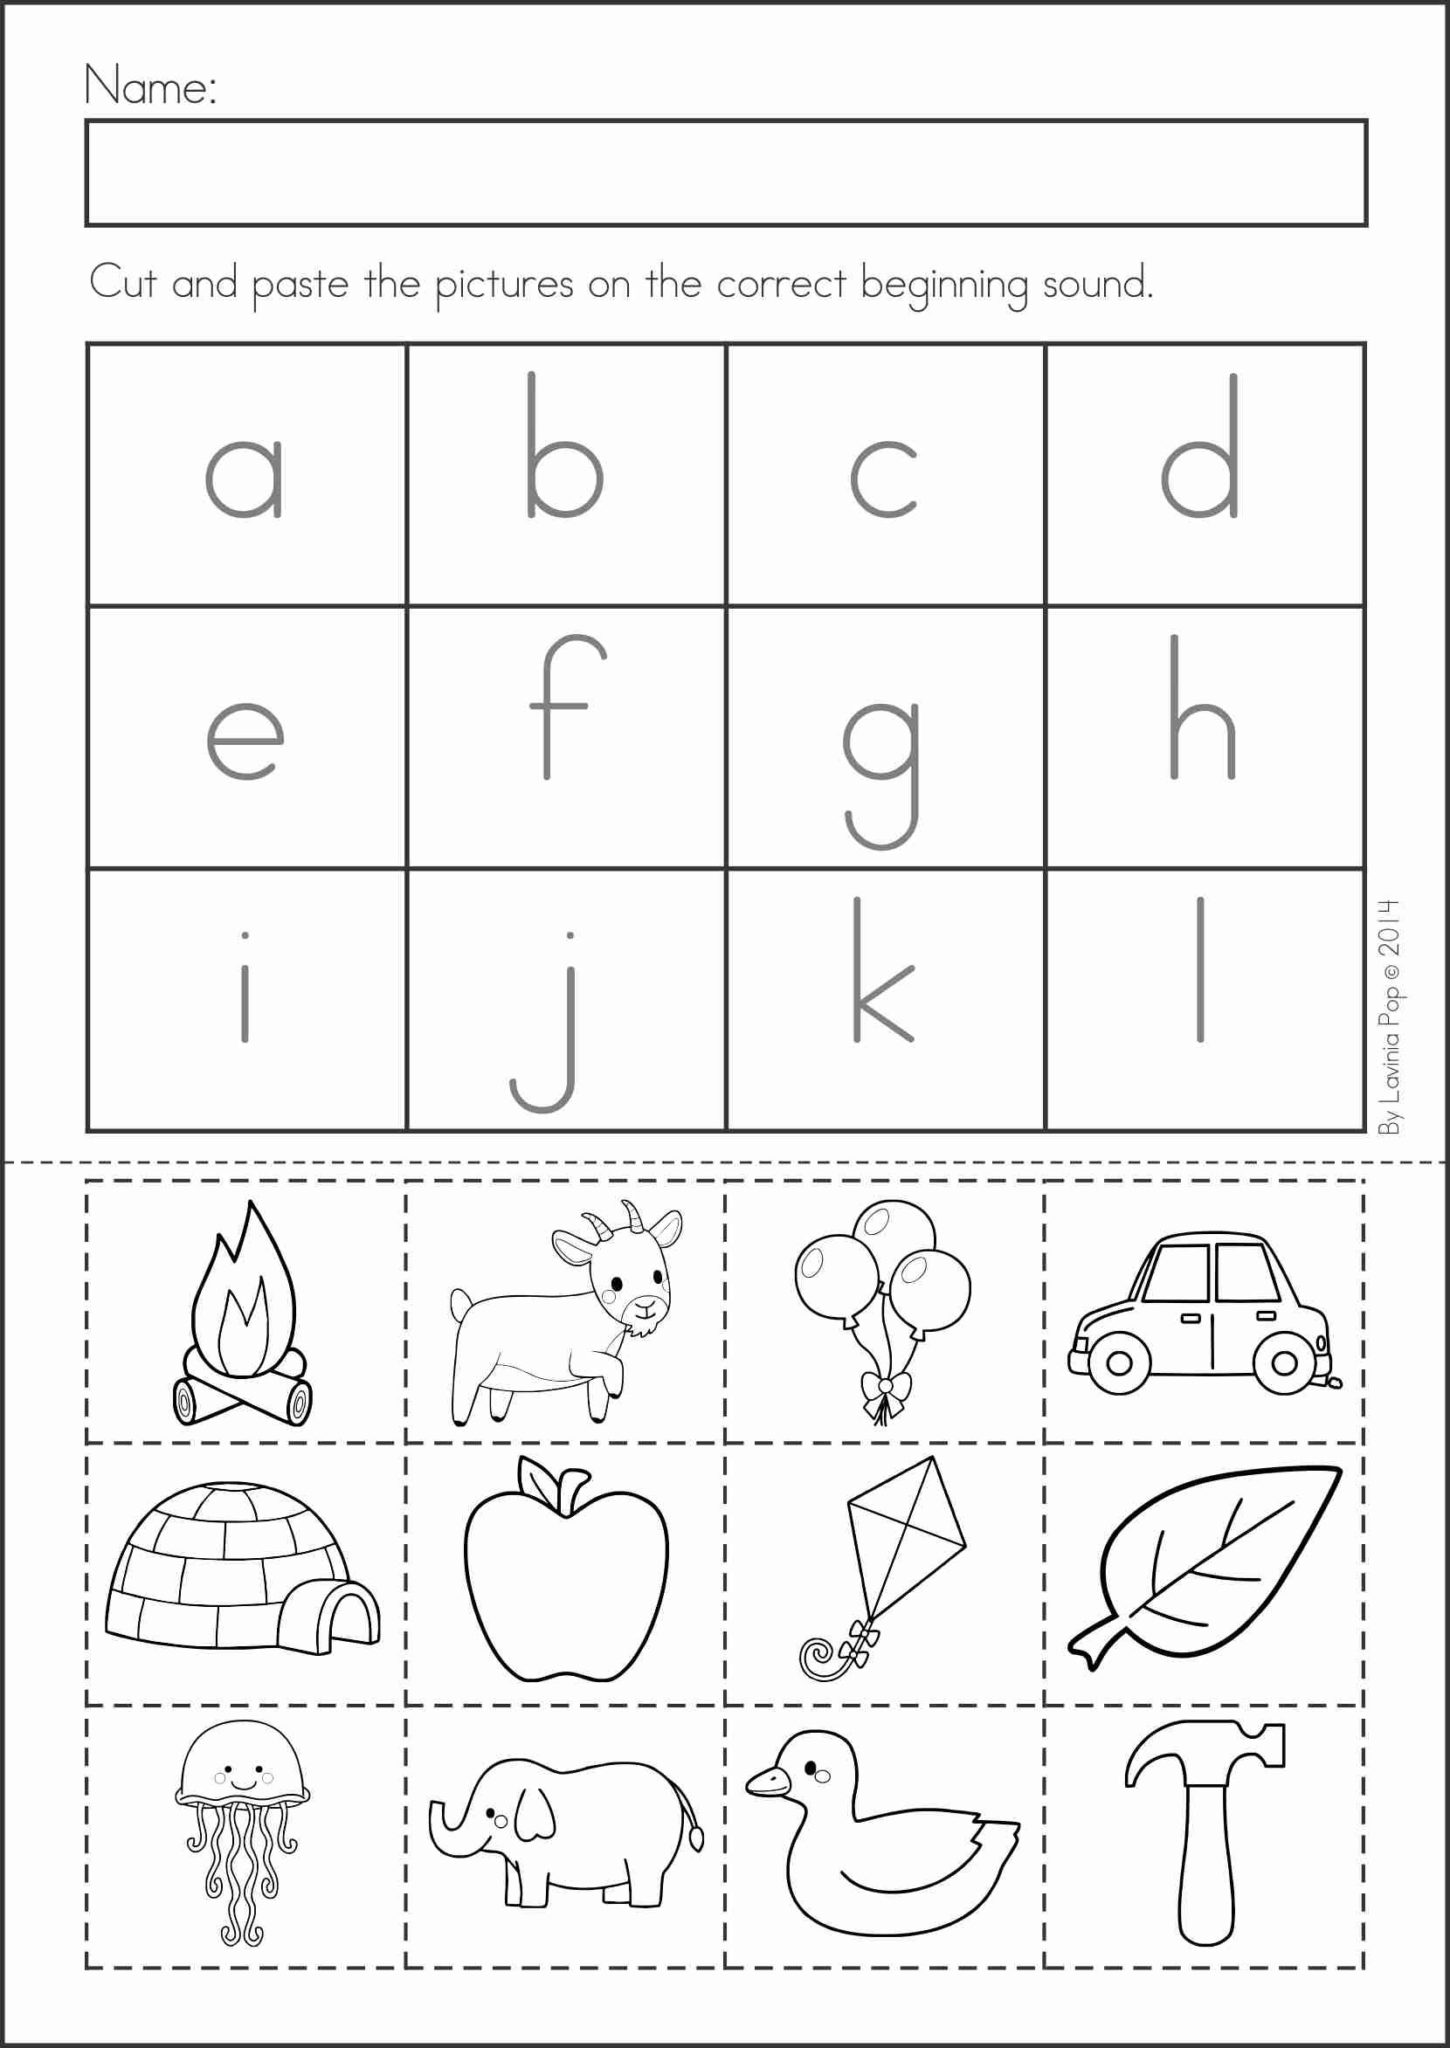 cut-and-paste-printable-worksheets